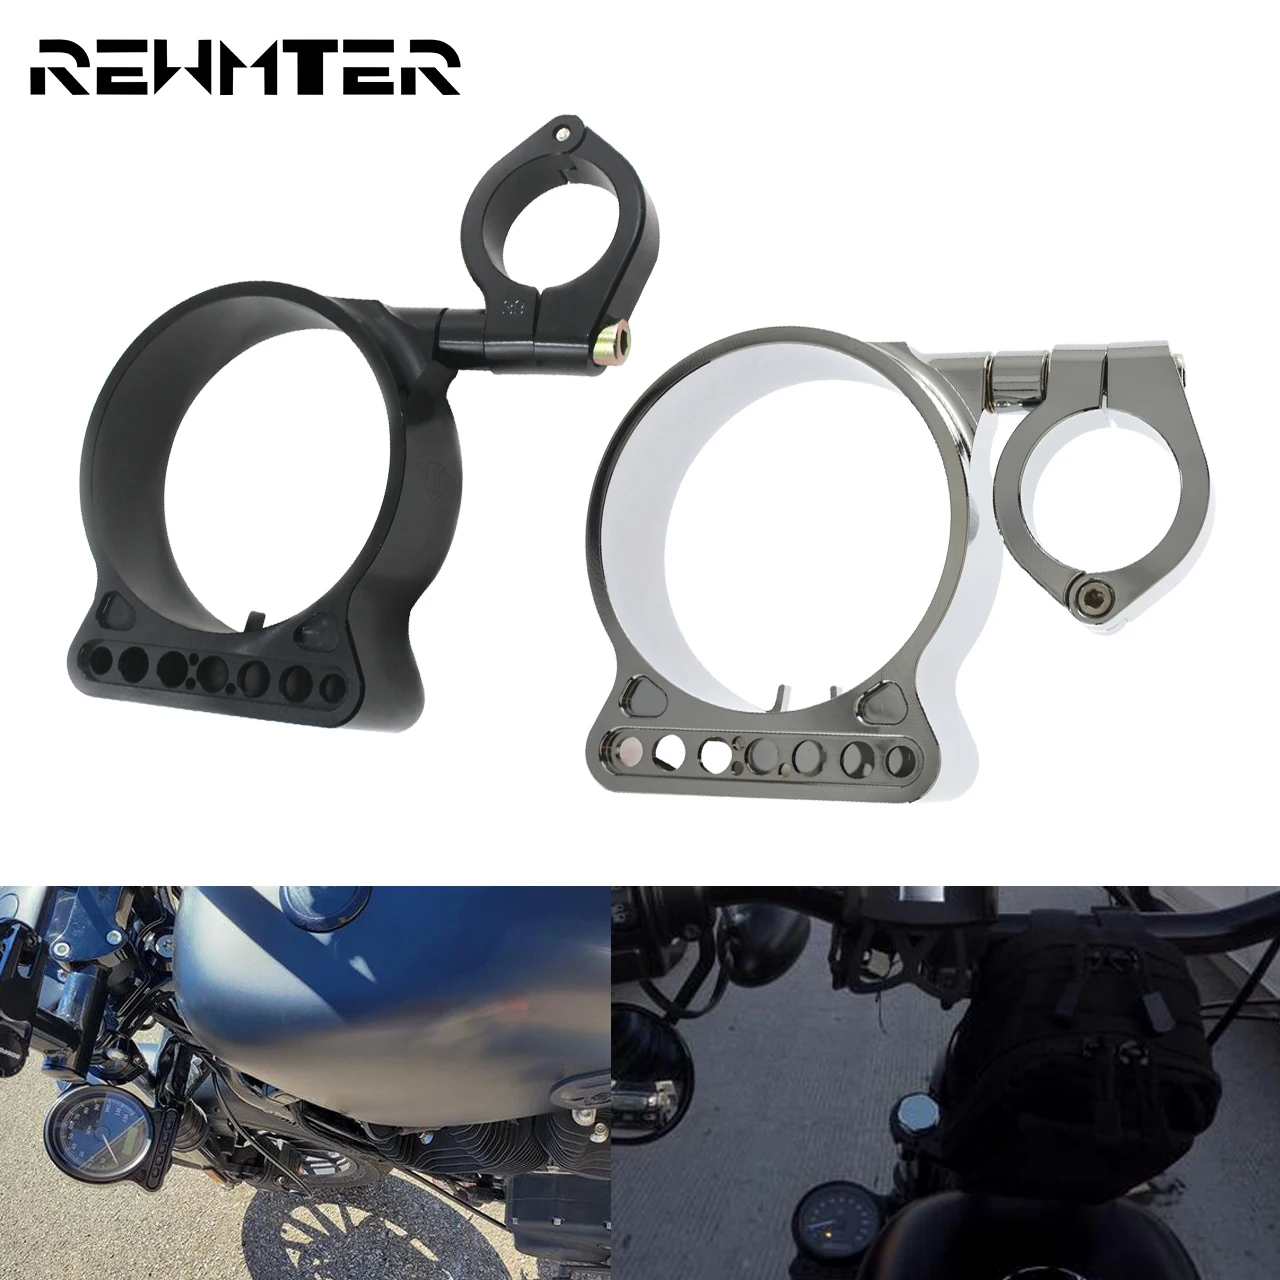 

Motorcycle Speedometer Side Mount Relocation Bracket Cover Instrument Case Housing For Harley Sportster XL1200 883 Iron Roadster